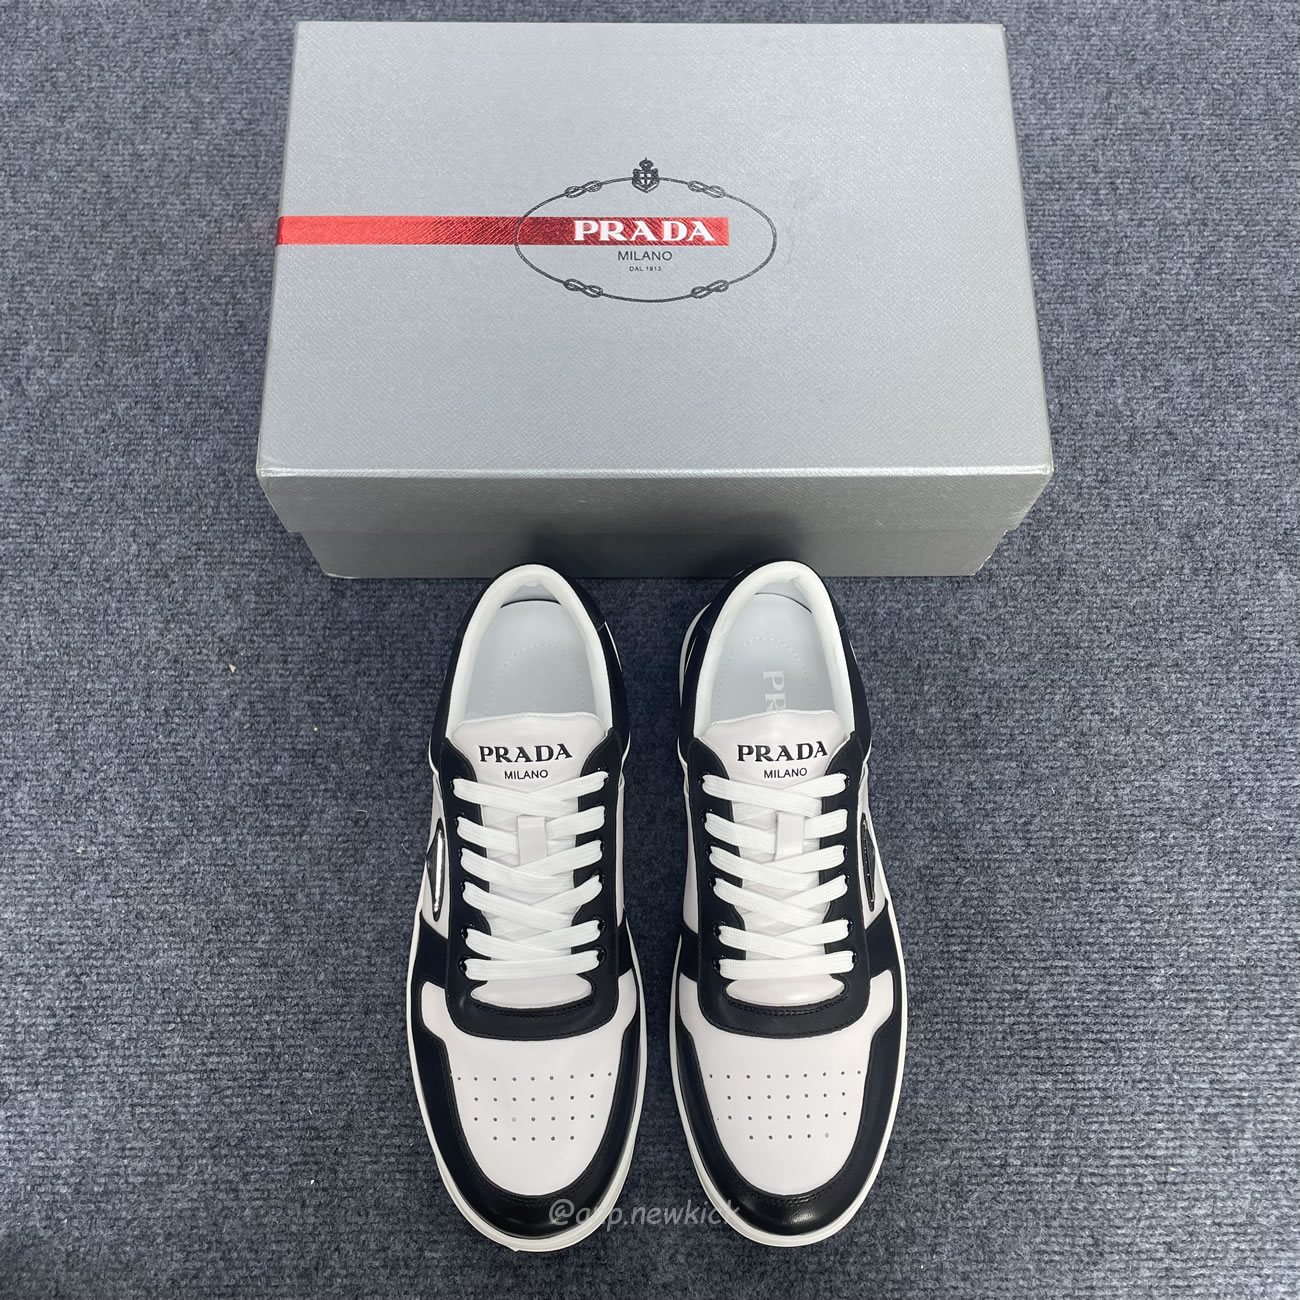 Prada Downtown Low Top Sneakers Leather White Black 2ee364 3lkg F0964 (3) - newkick.org